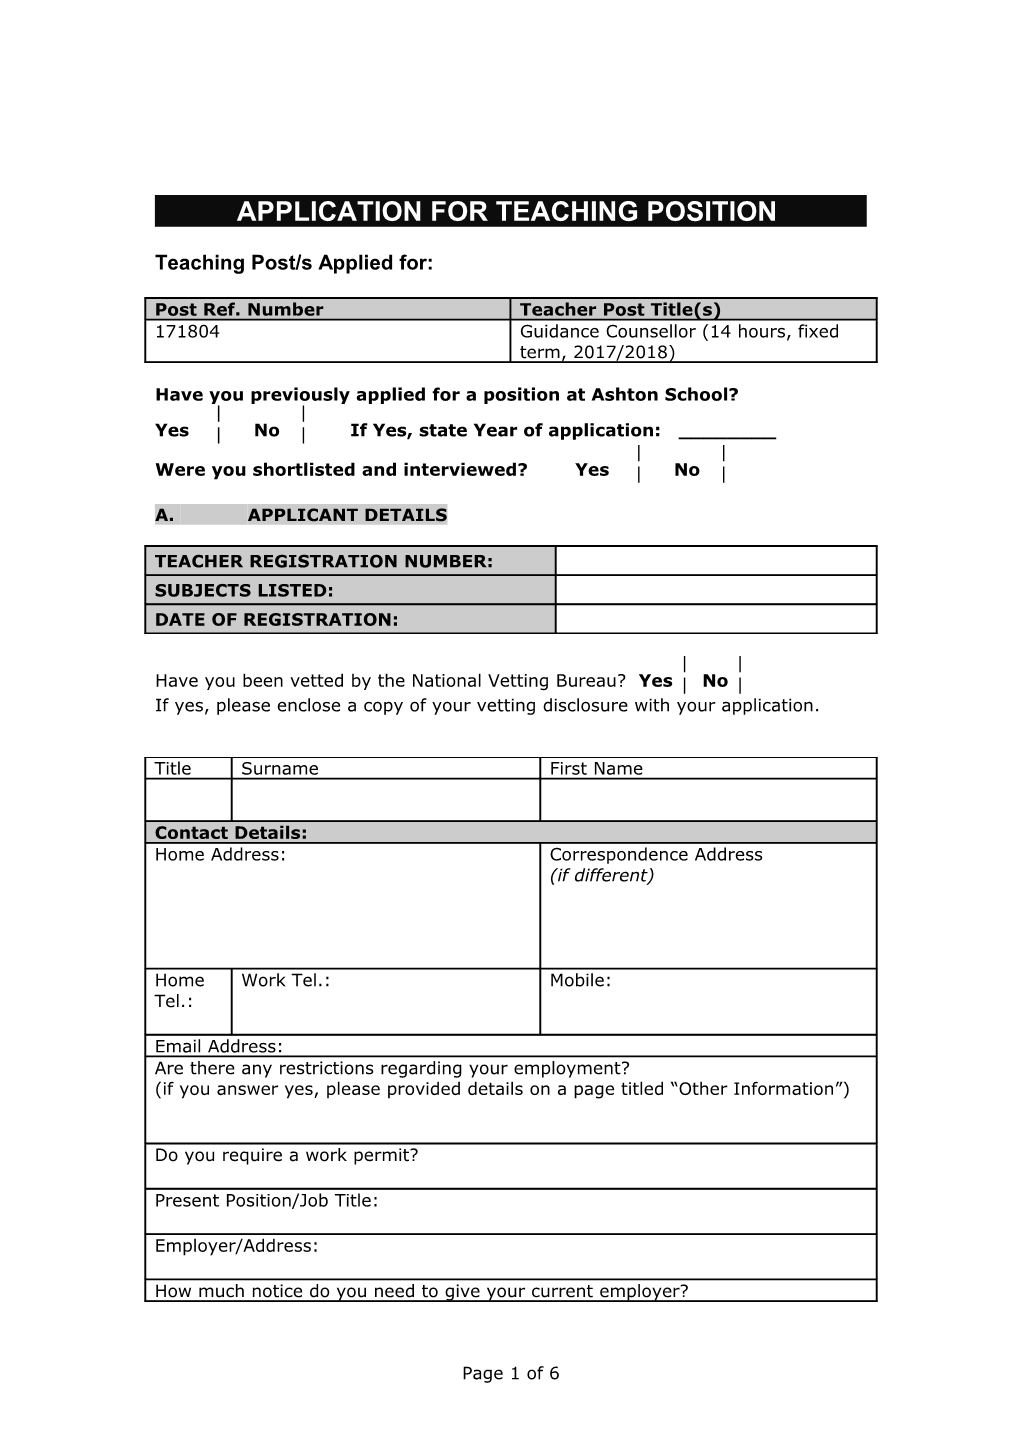 Application for Teaching Position 2008/09